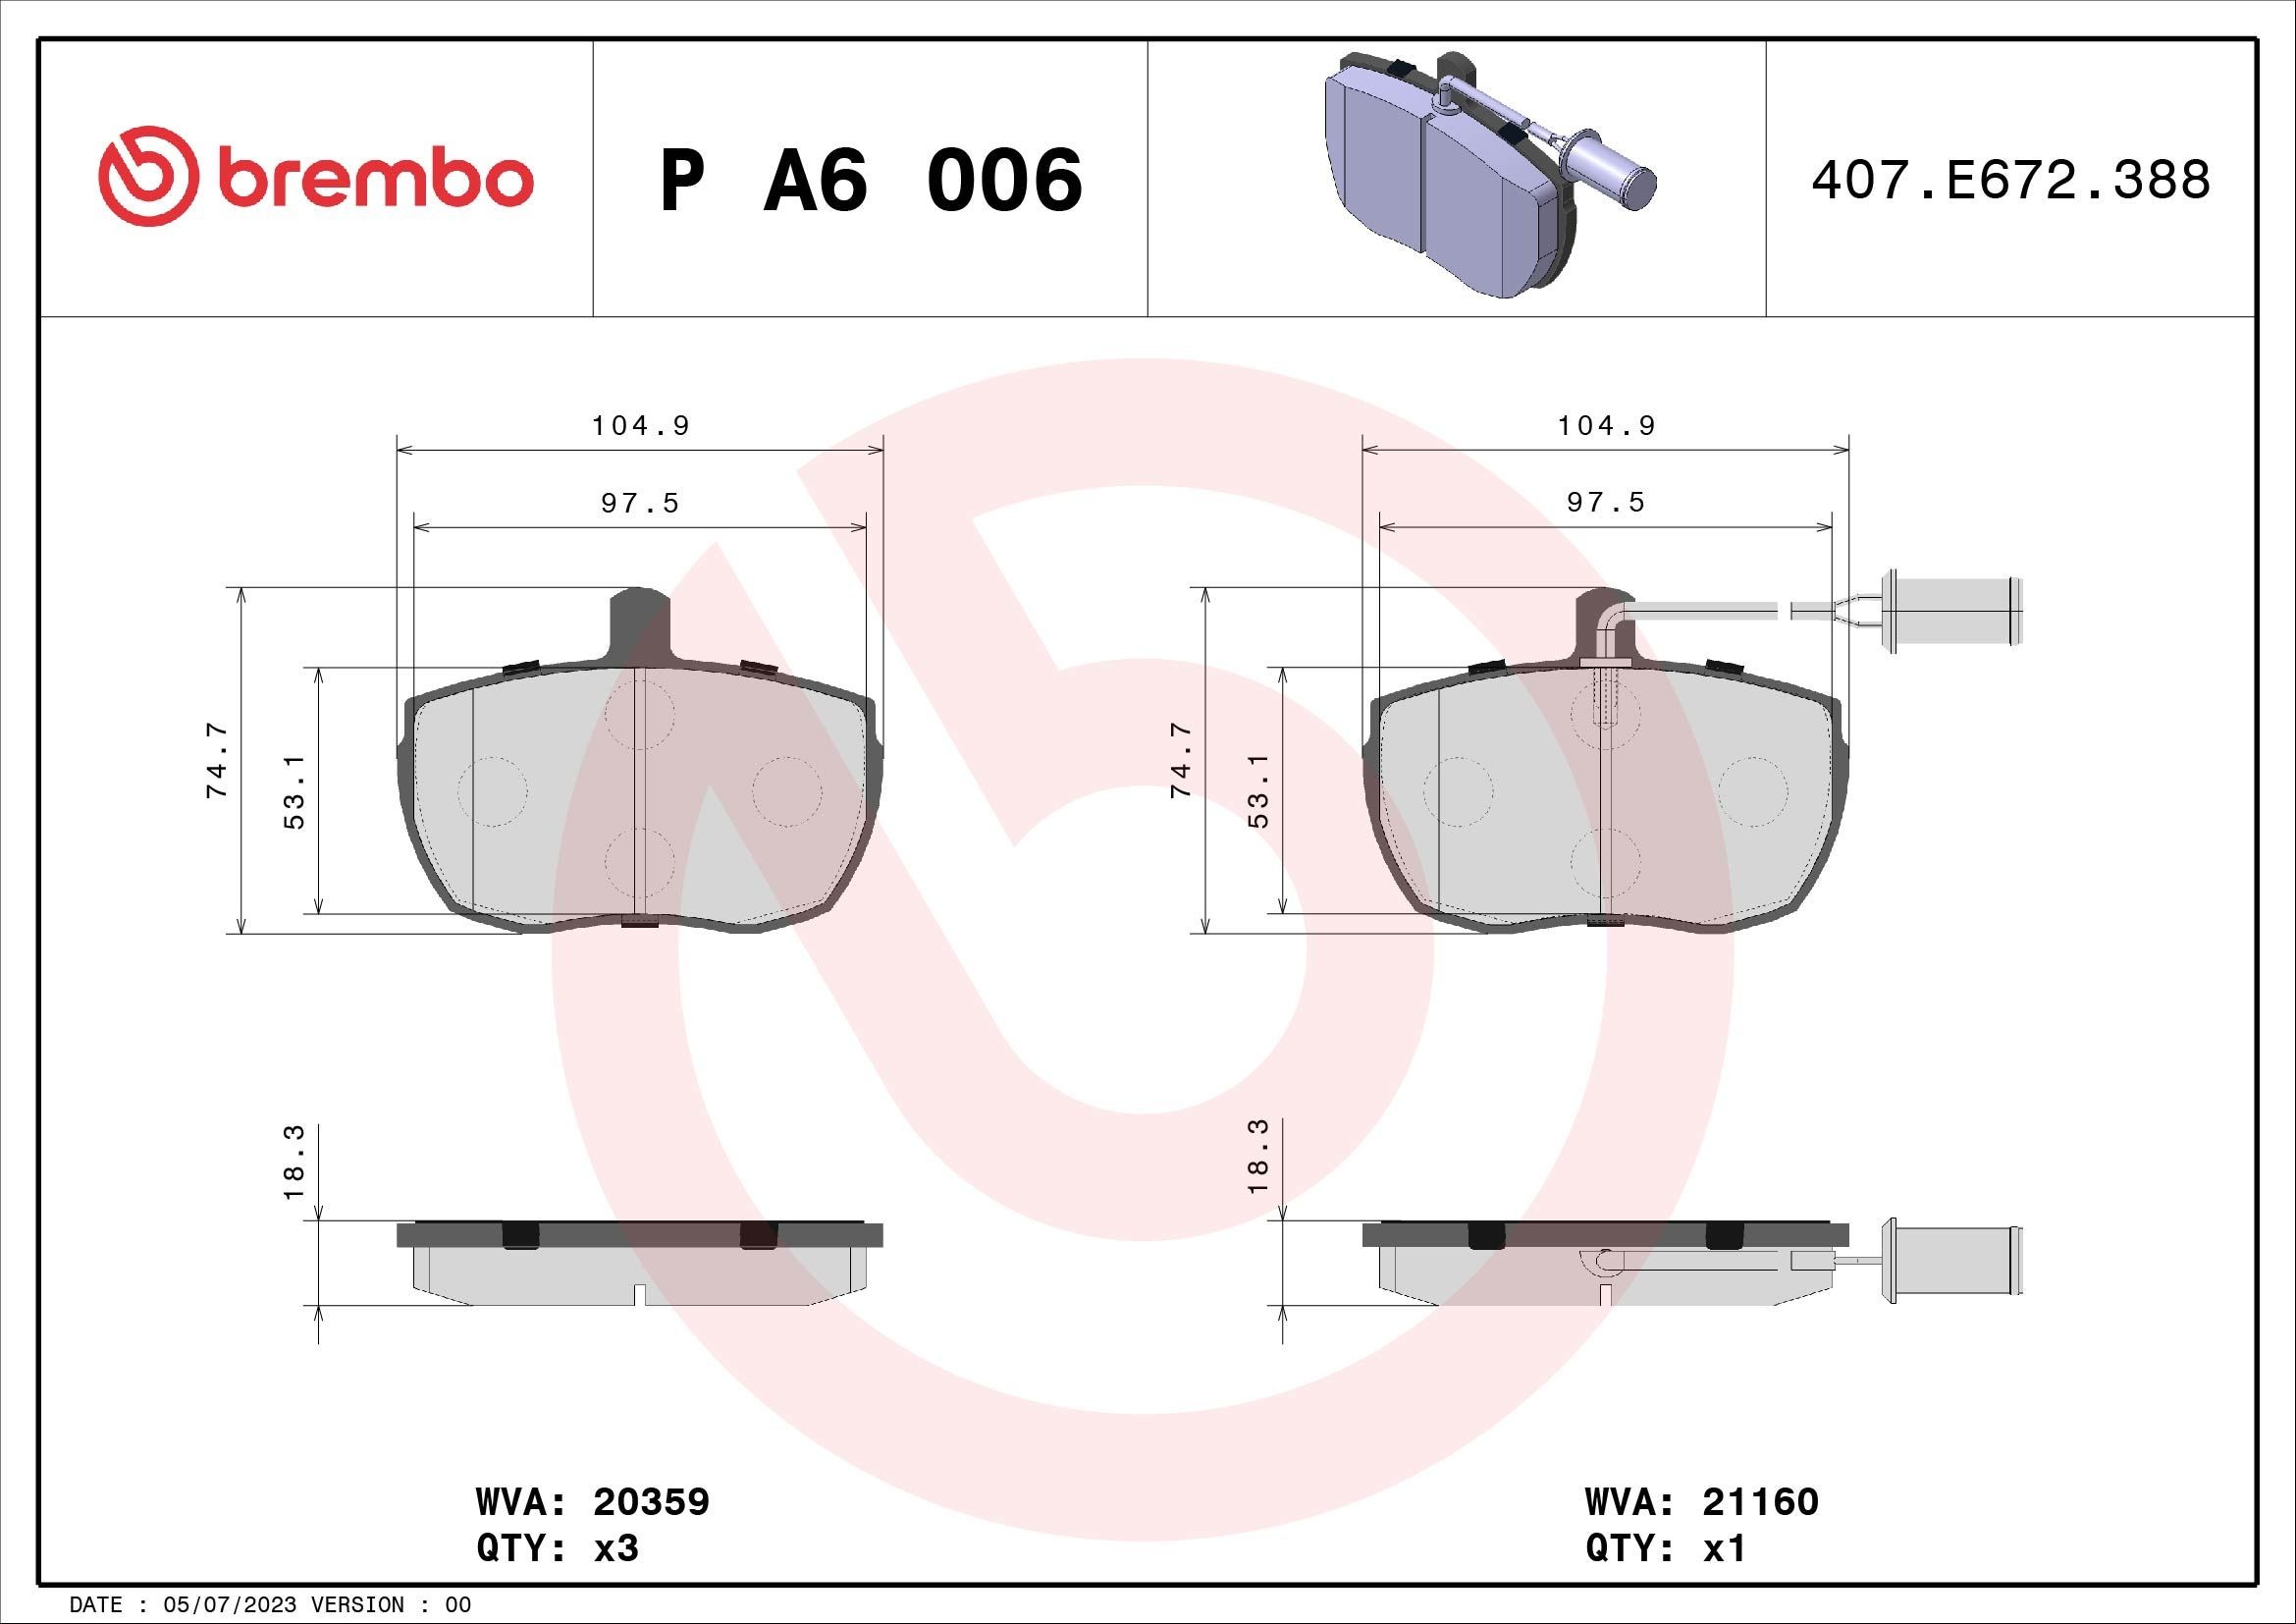 BREMBO P A6 006 Brake pad set incl. wear warning contact, without accessories